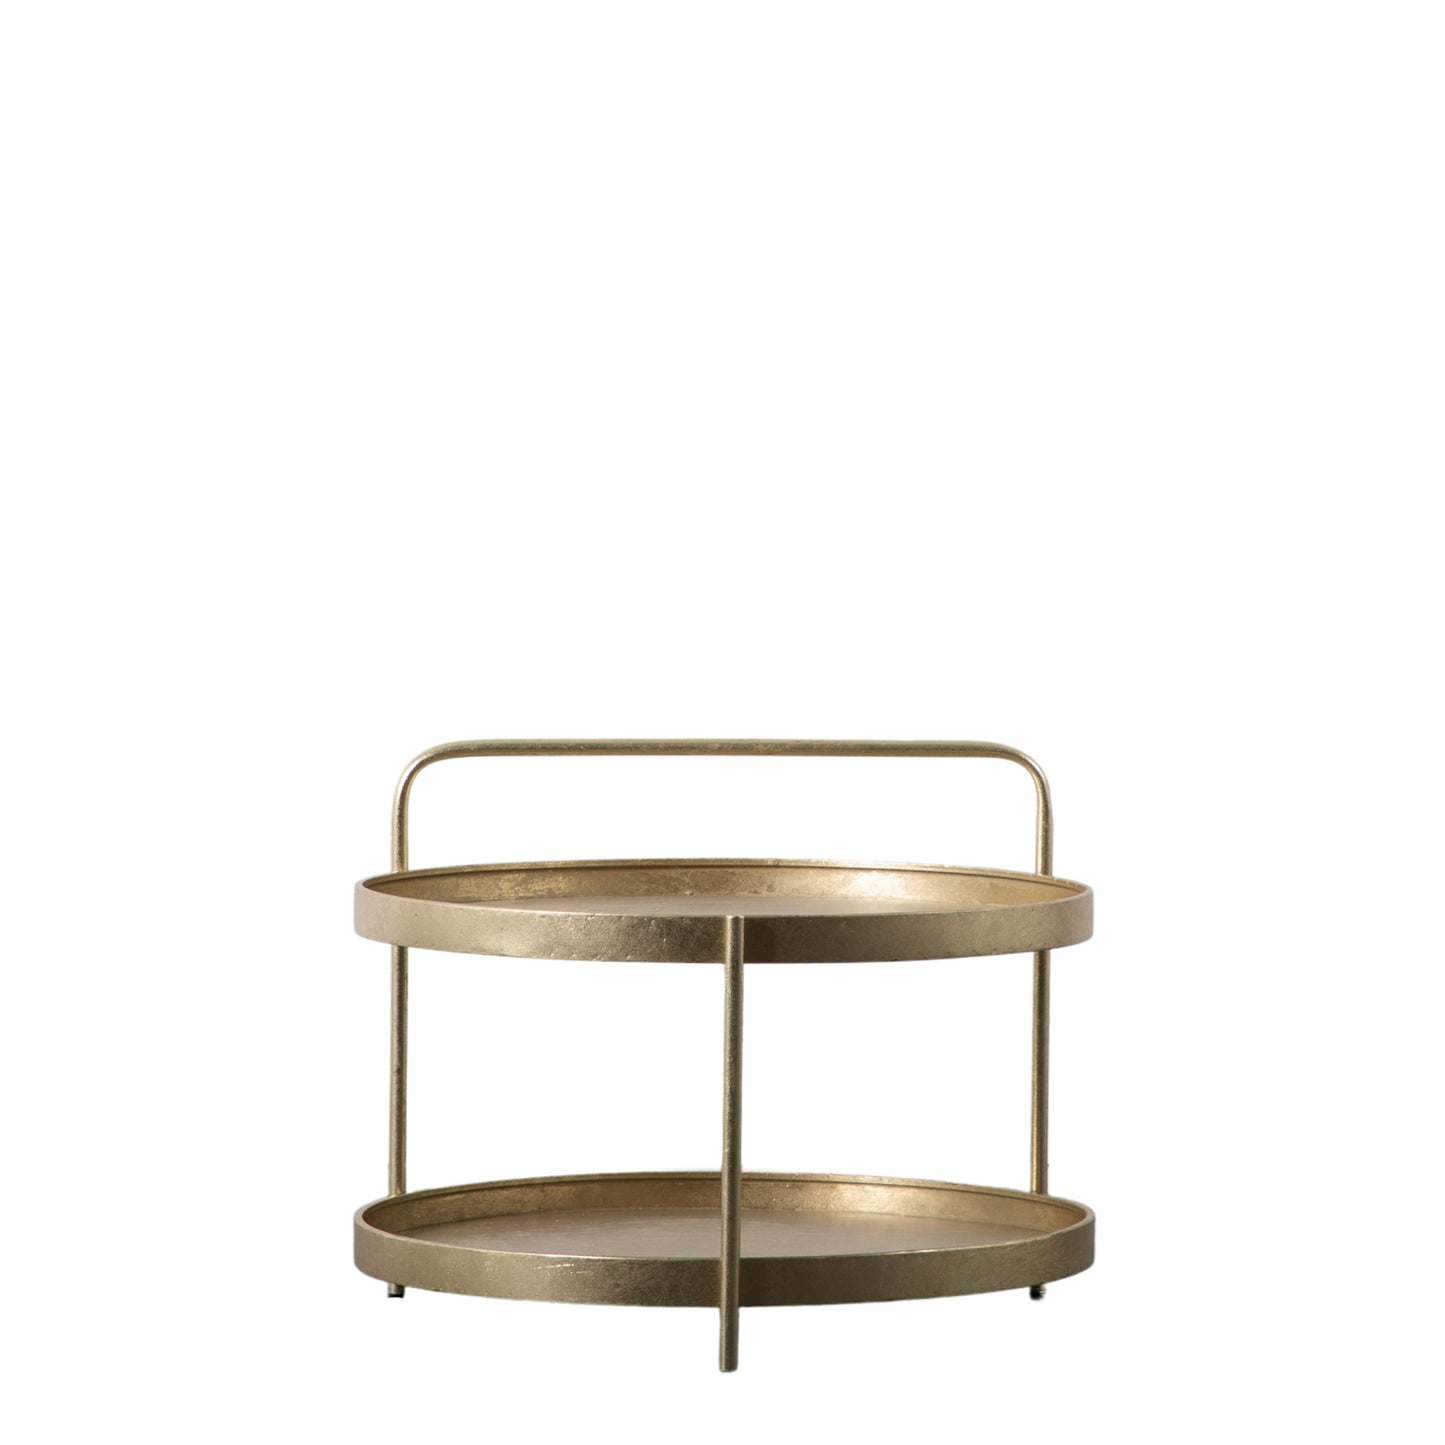 A gold coffee table with metal handle for interior decor from Kikiathome.co.uk.